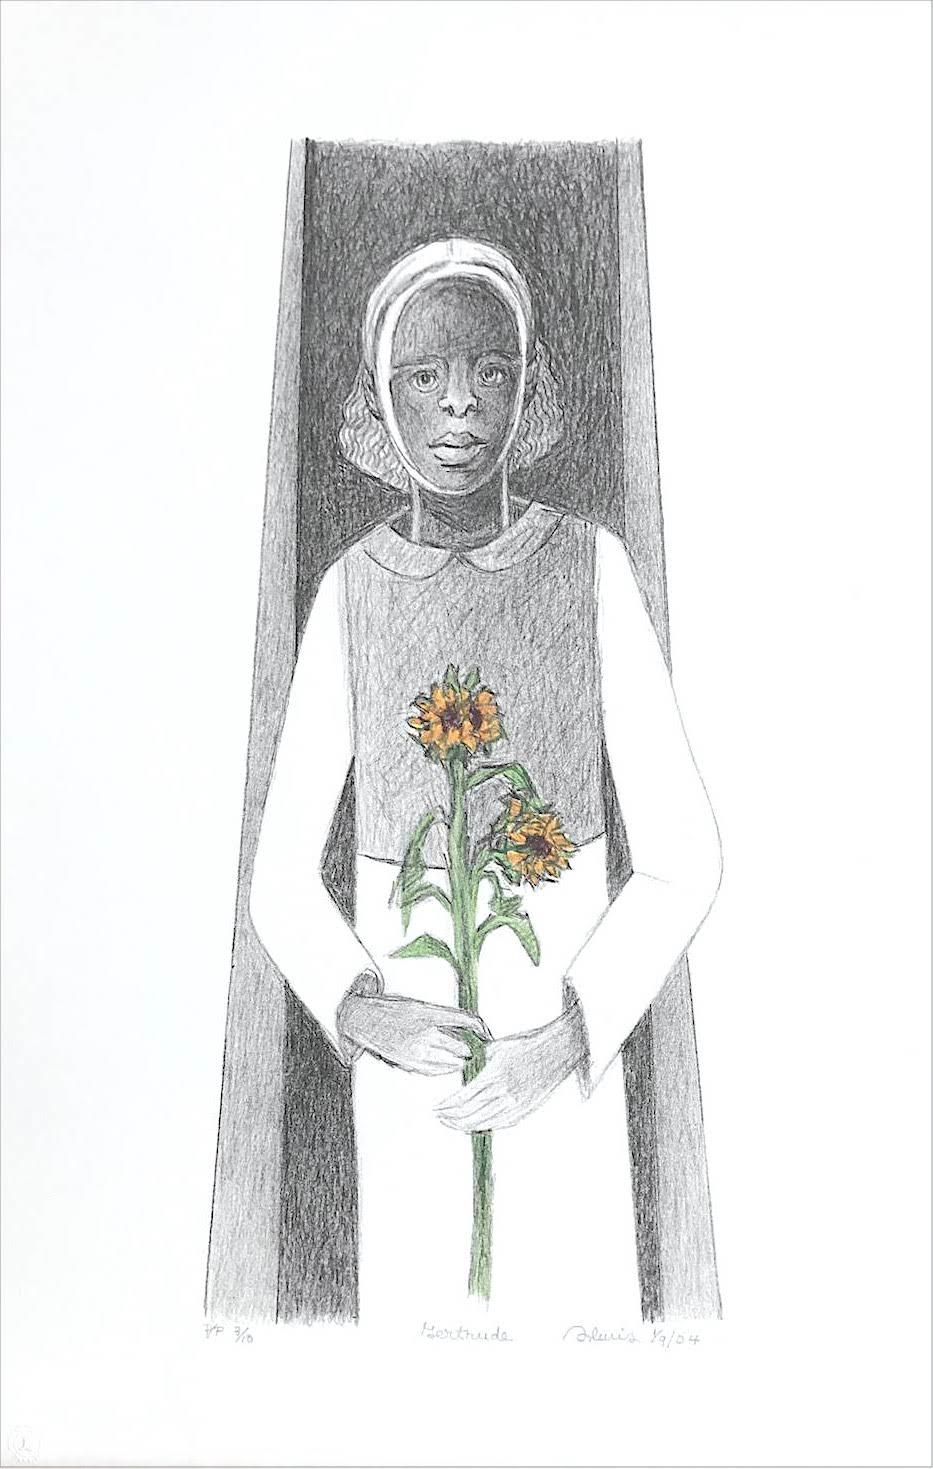 GERTRUDE Hand Drawn Lithograph, Young Black Girl Portrait, Sunflower